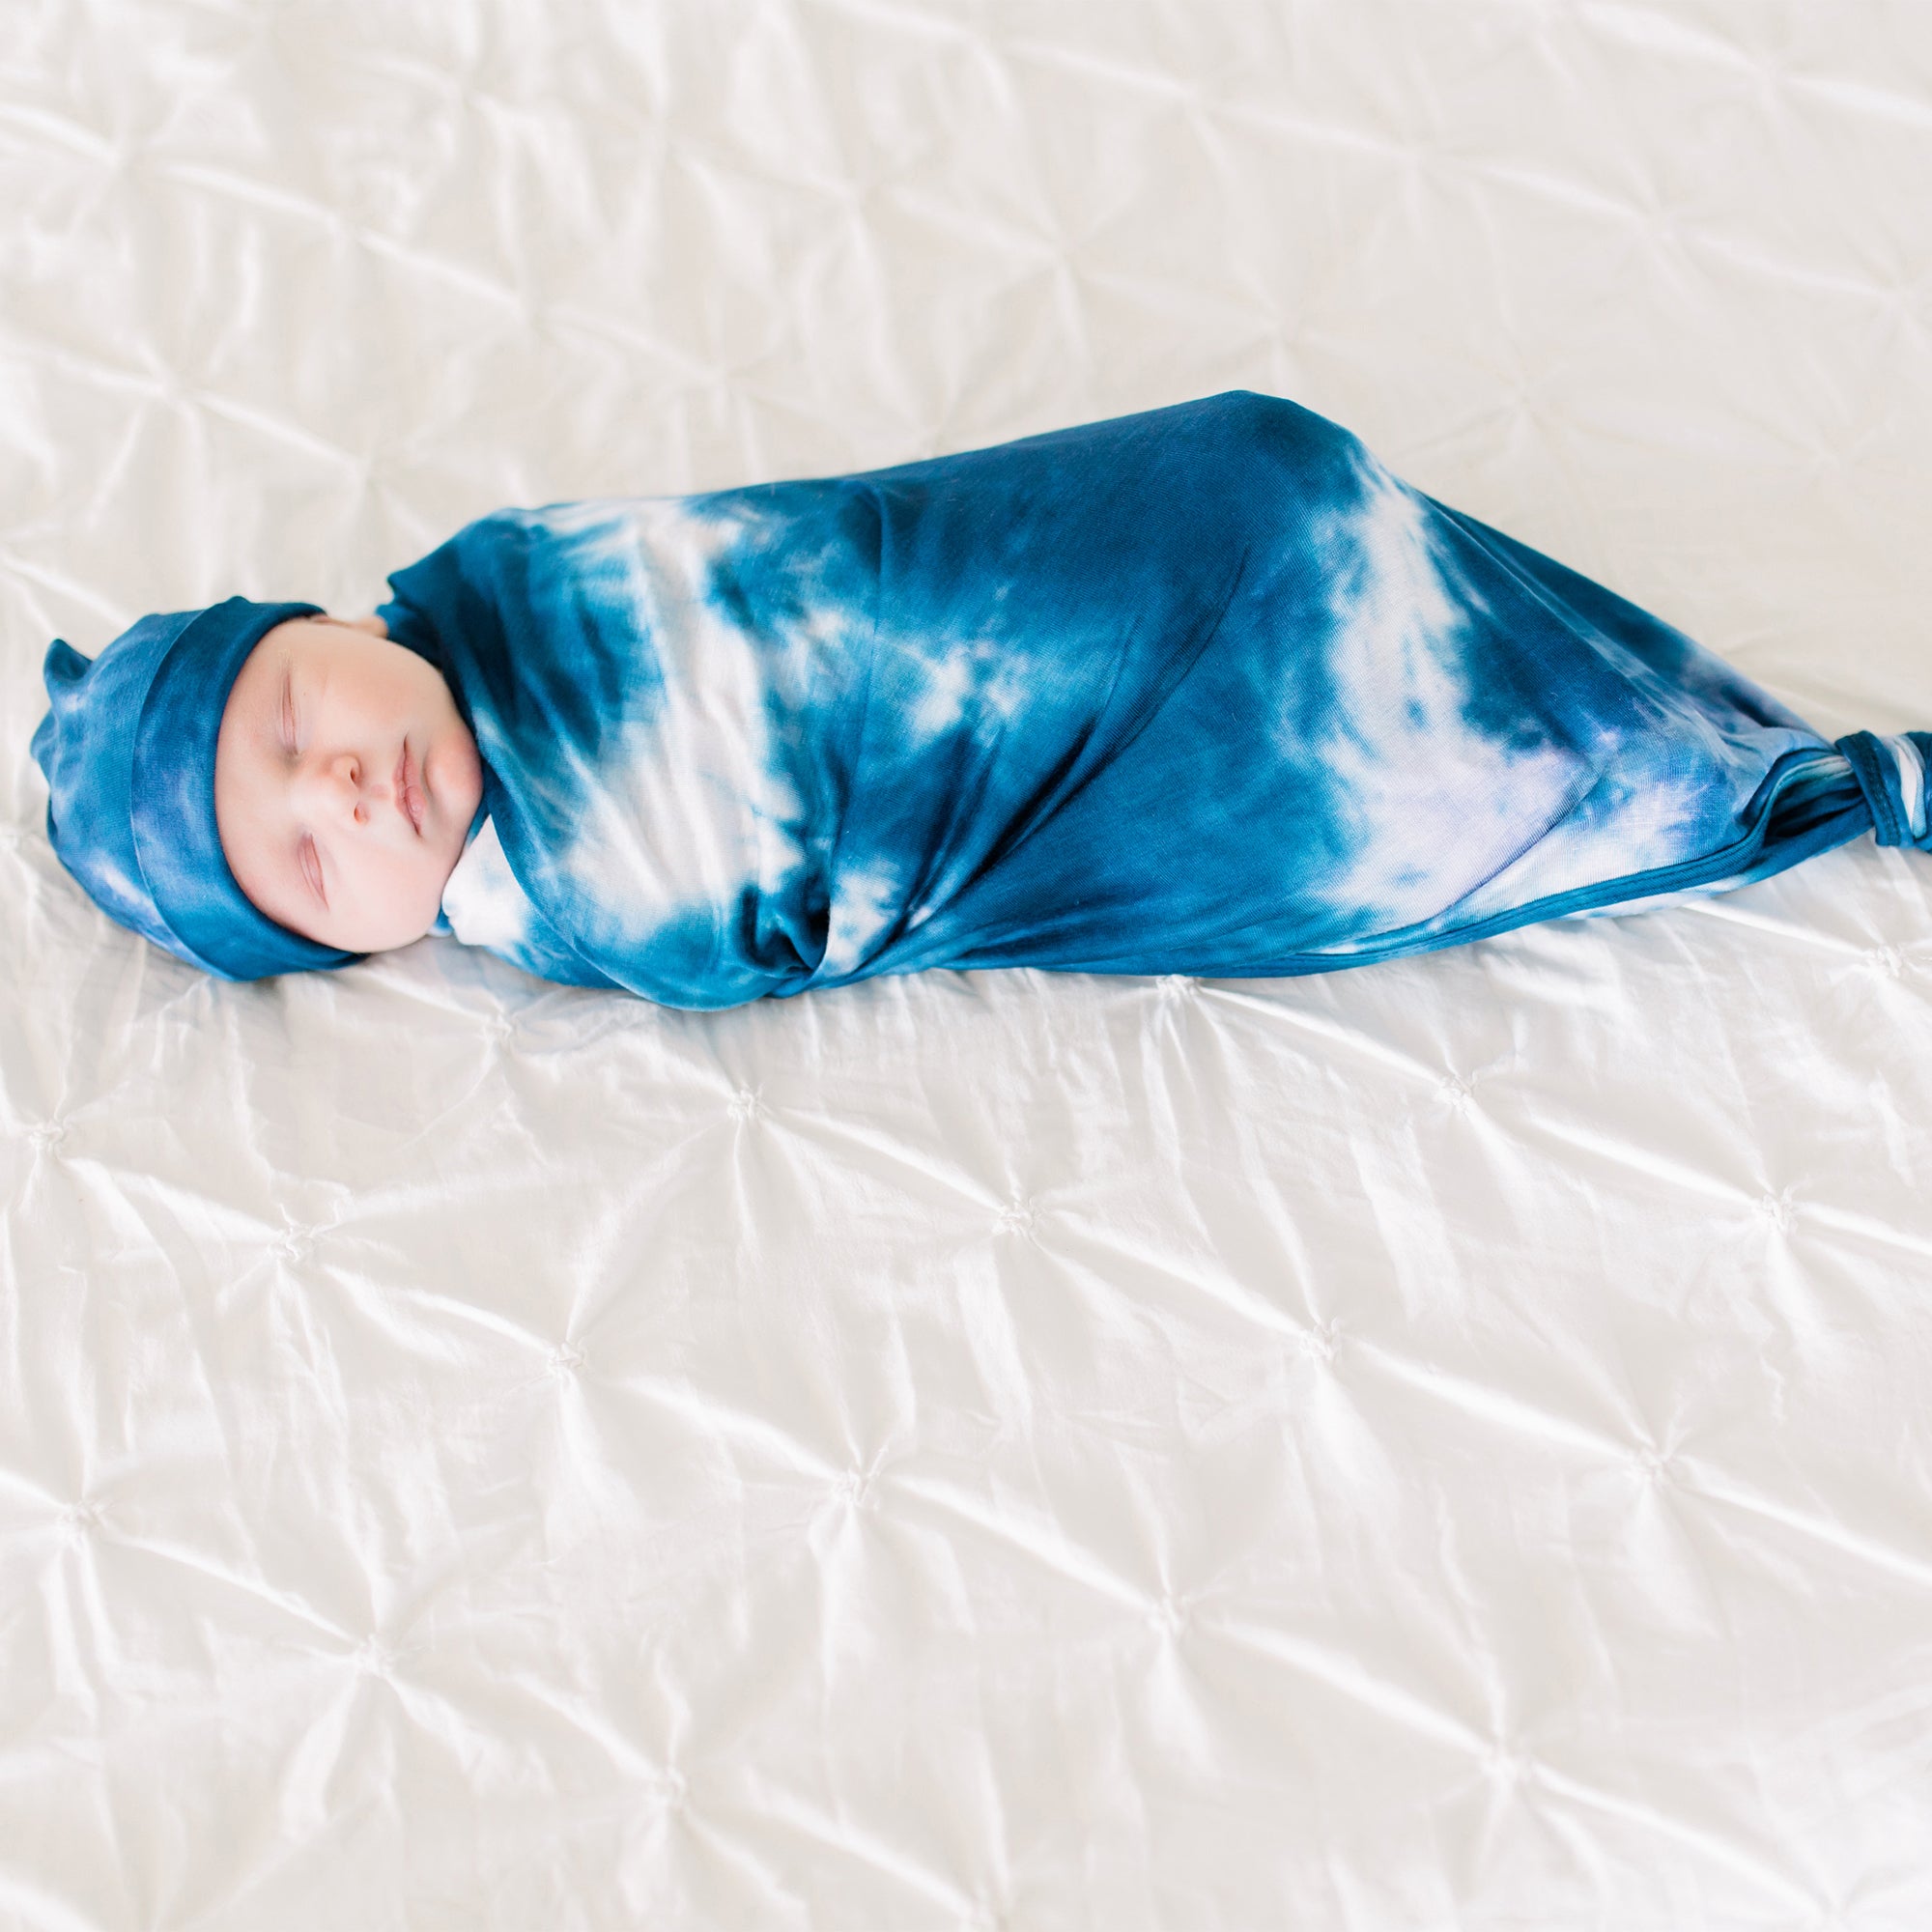 Forever Swaddle + Hat Set 2-Pack: Navy + Navy Tie-Dye